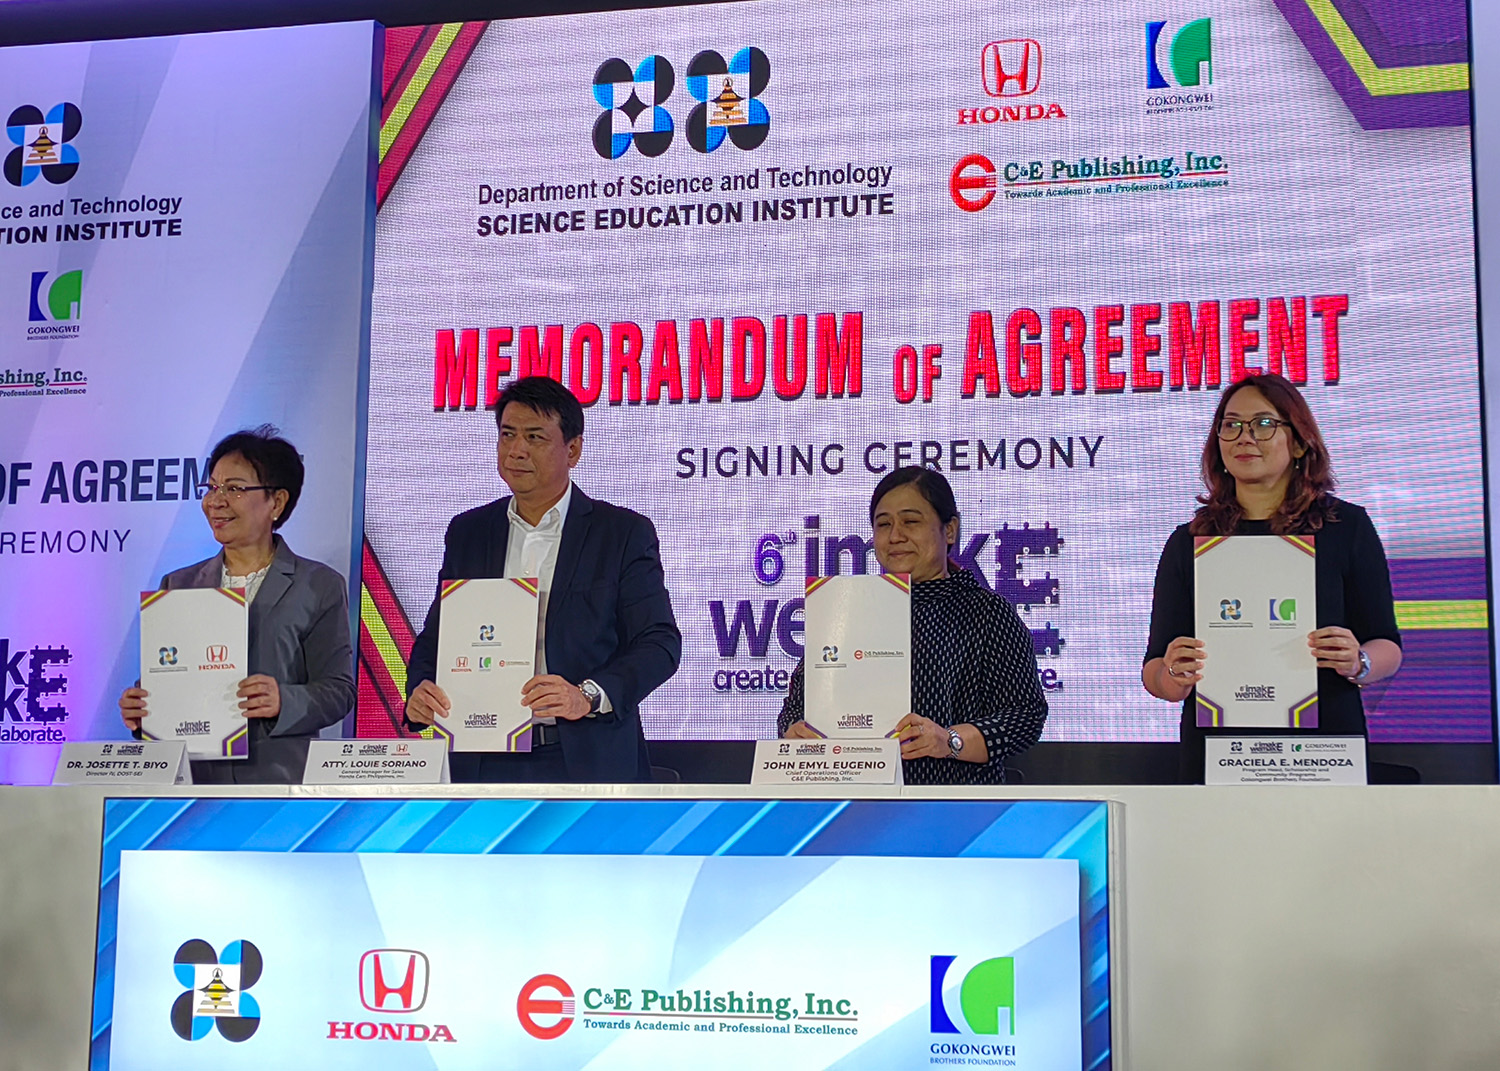 GBF to grant Young Scientist Award, STEM scholarships to outstanding finalists of DOST-SEI's high school innovation contest